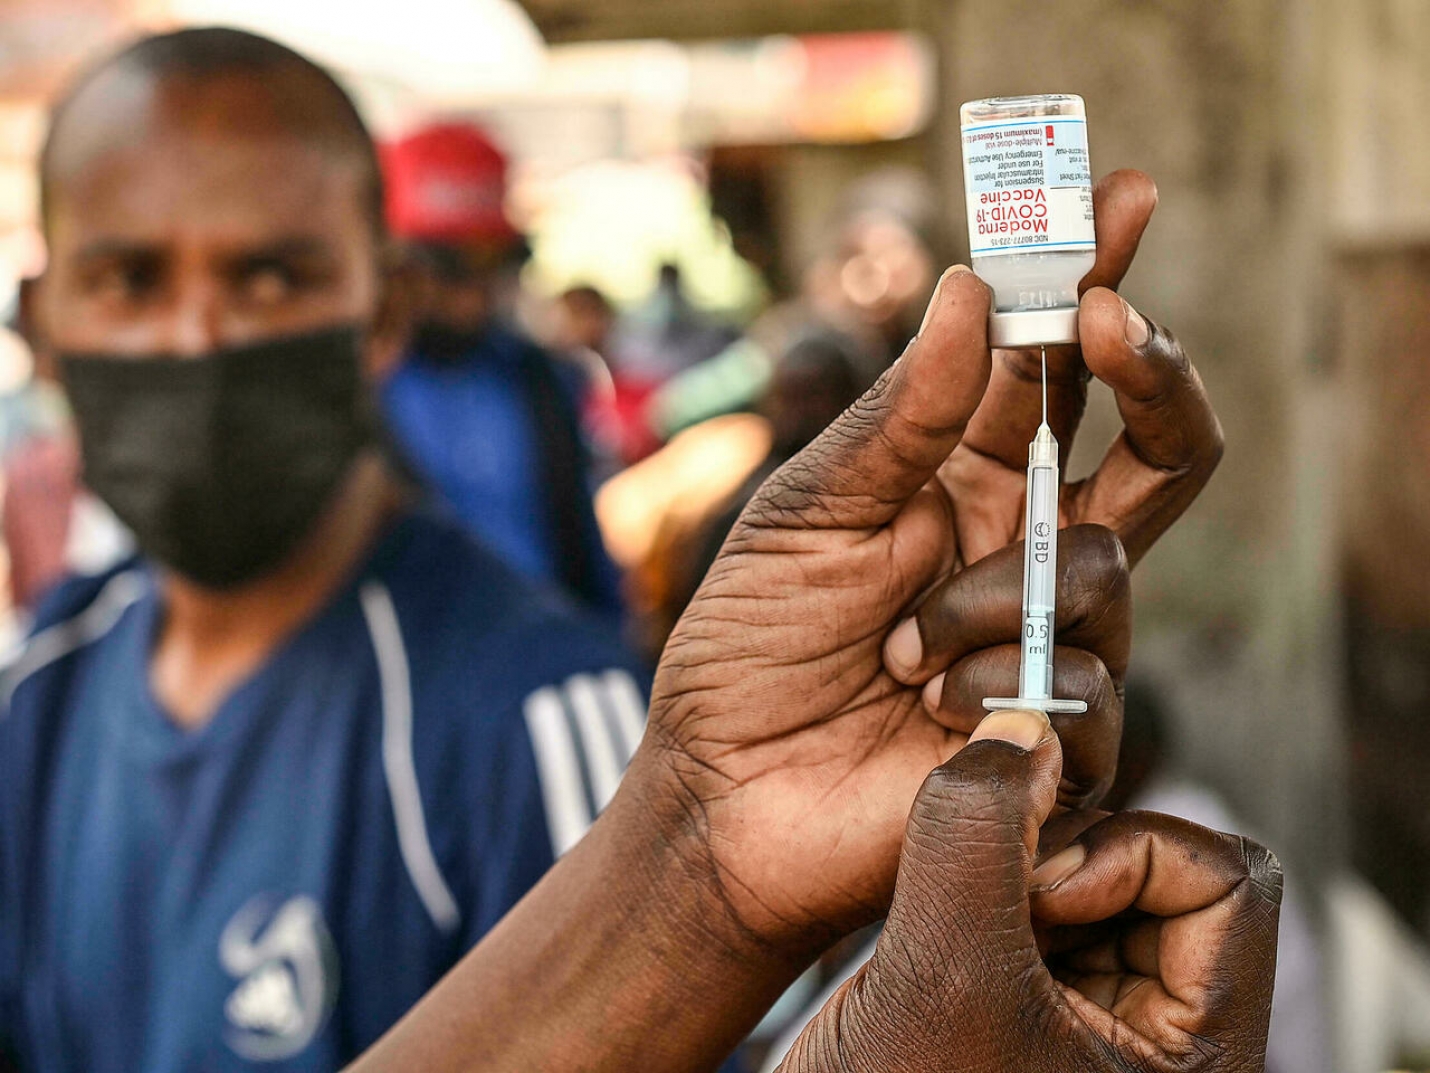 Kenya to demand covid-19  vaccination to access government services